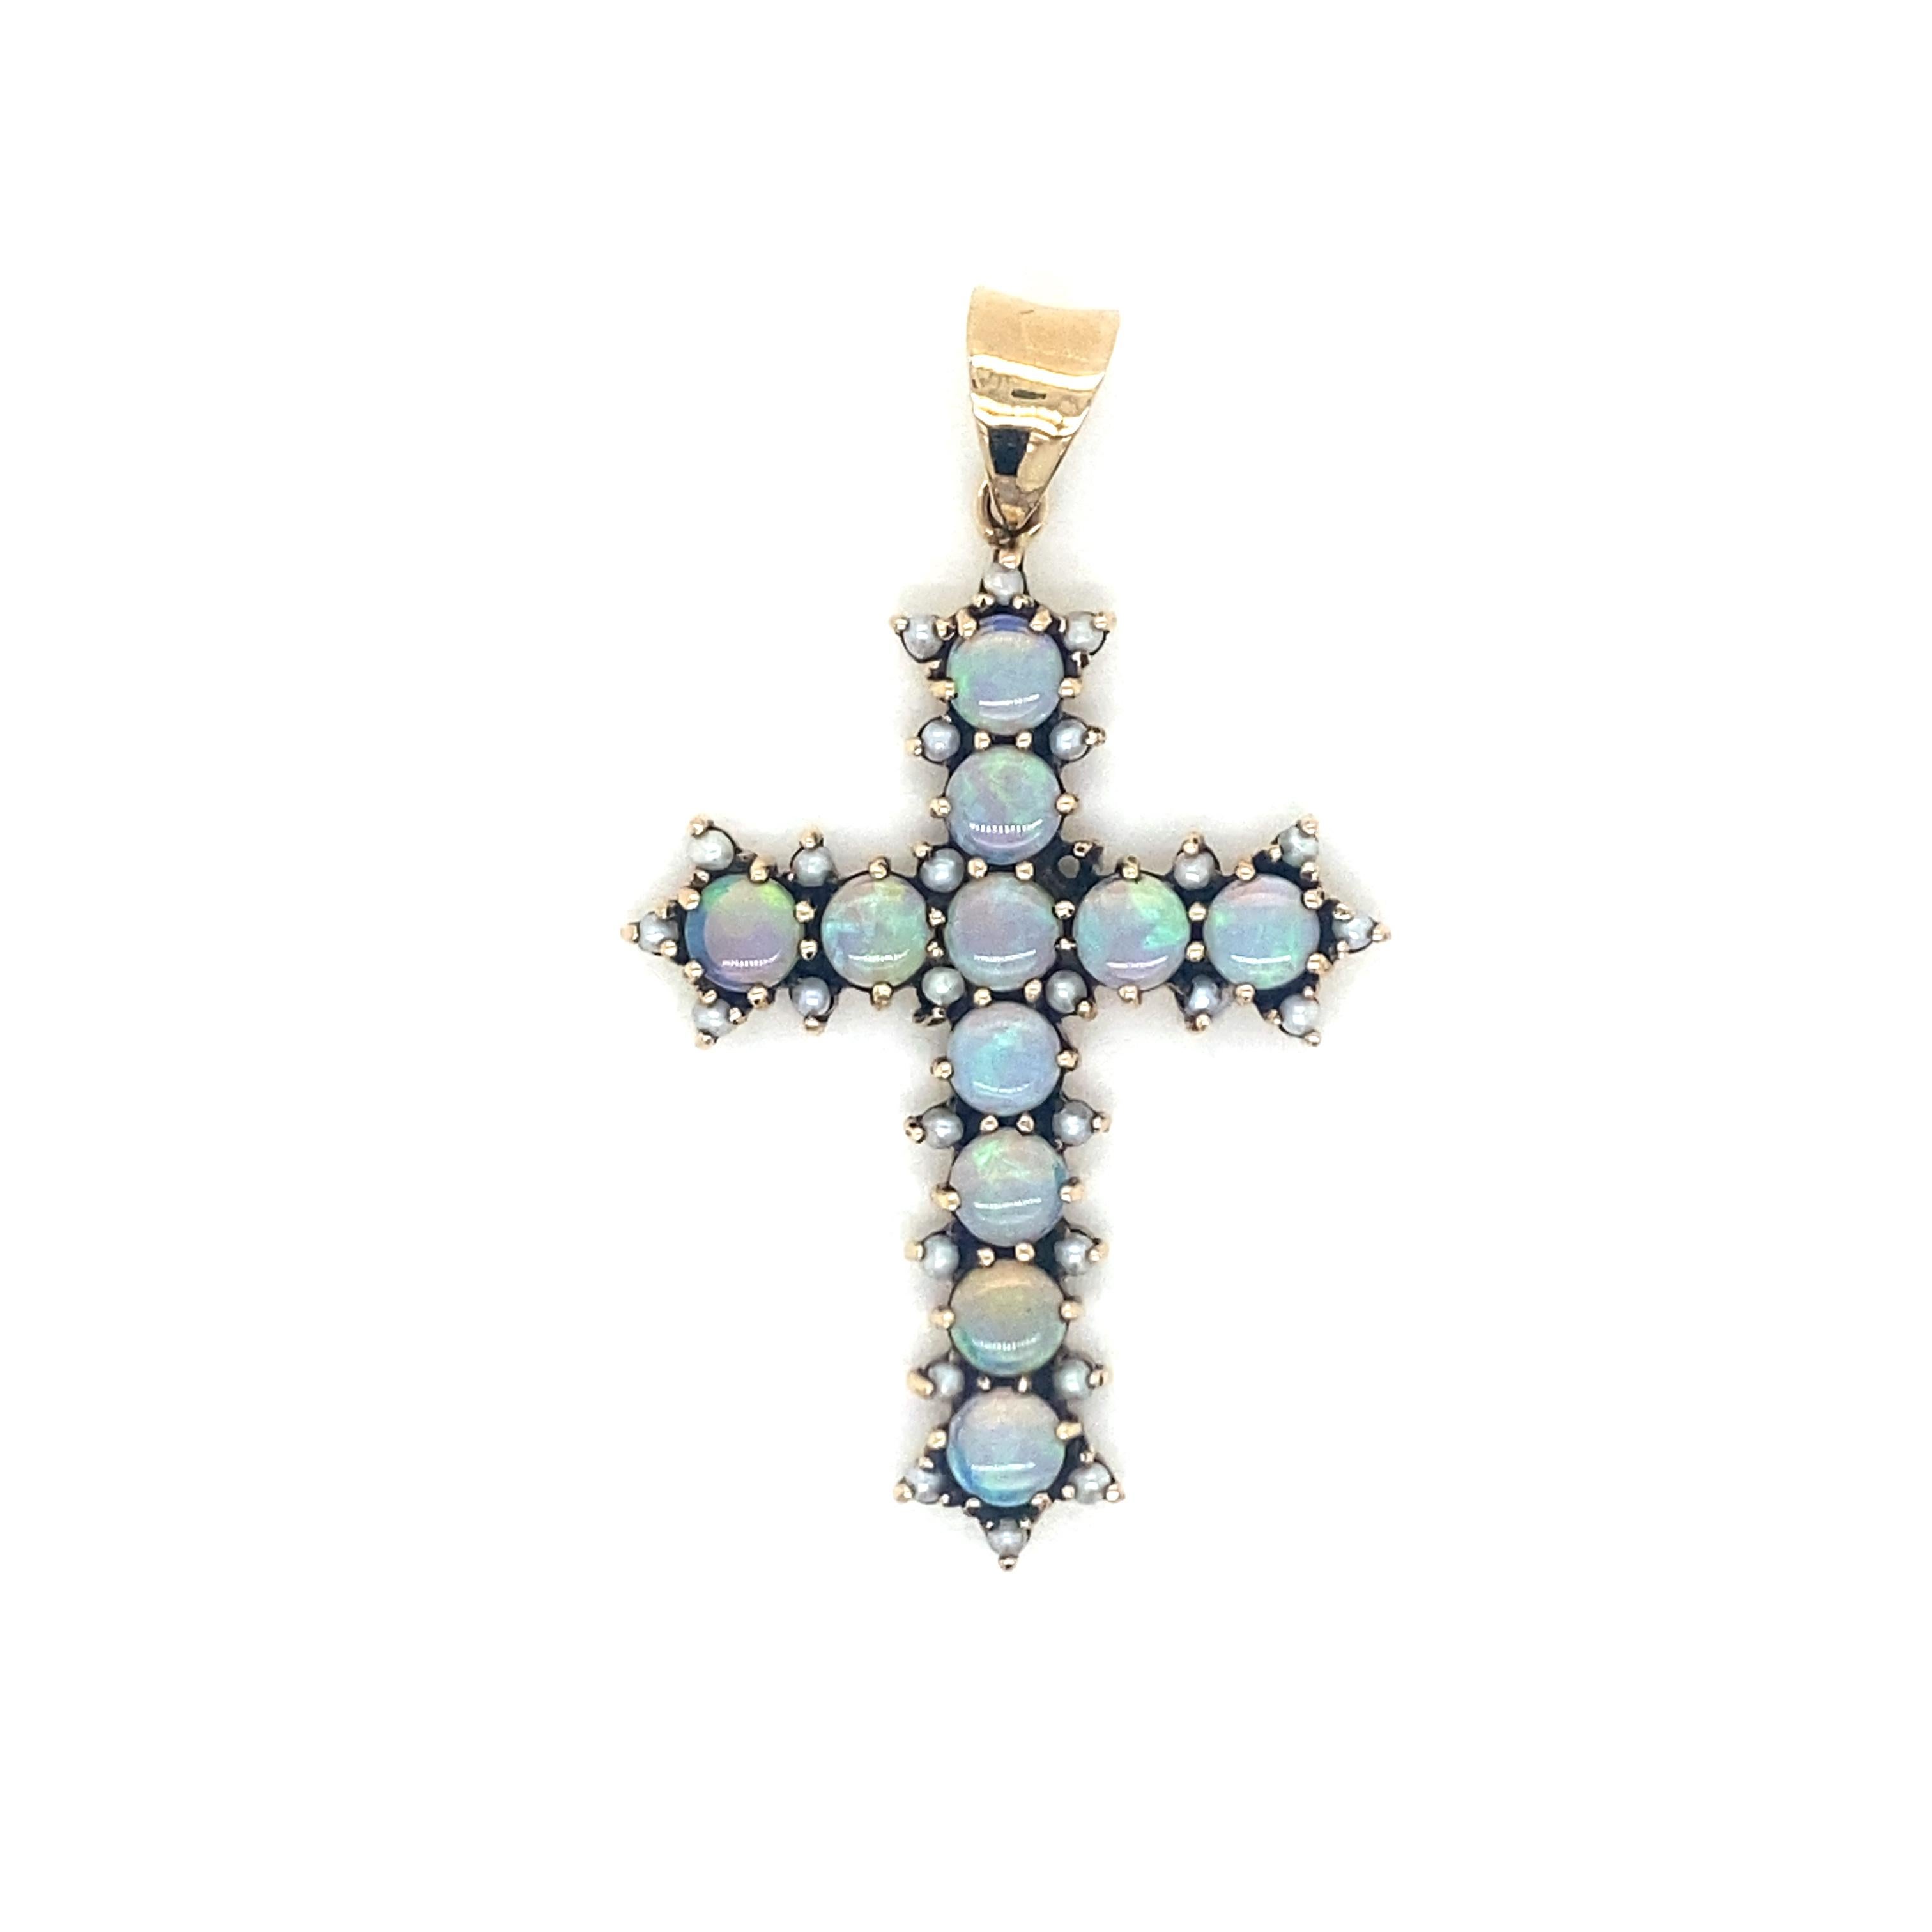 Unusual 14k yellow Gold Cross, it features sparkling Natural Opal and micro pearls.
Italy, circa 1980'

Measures: long 1,37 inches (3,5 cm) x wide 0,78 in (2,5 cm) 
Gross weight: 4 Grams   

The Jewel comes in a nice box with warranty 

*